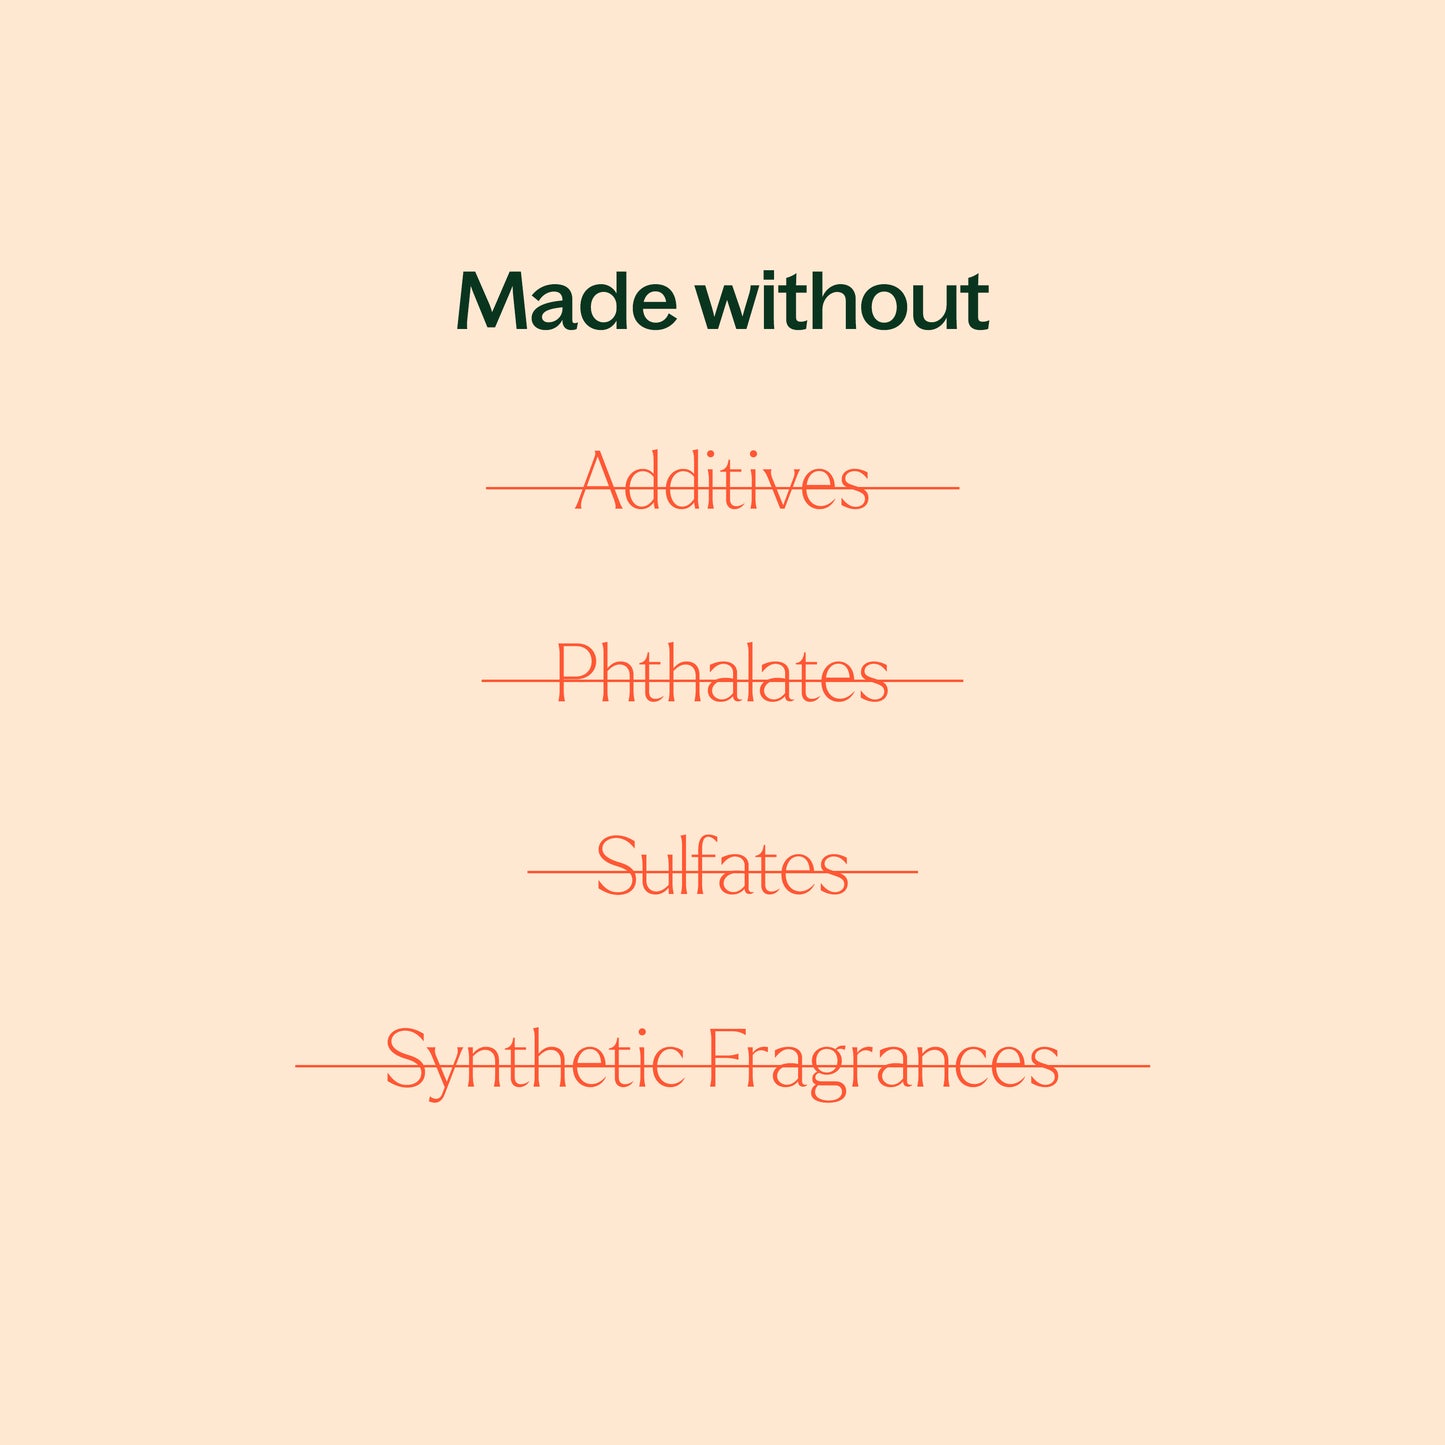 made without additives, phthalates, sulfates, synthetic fragrances